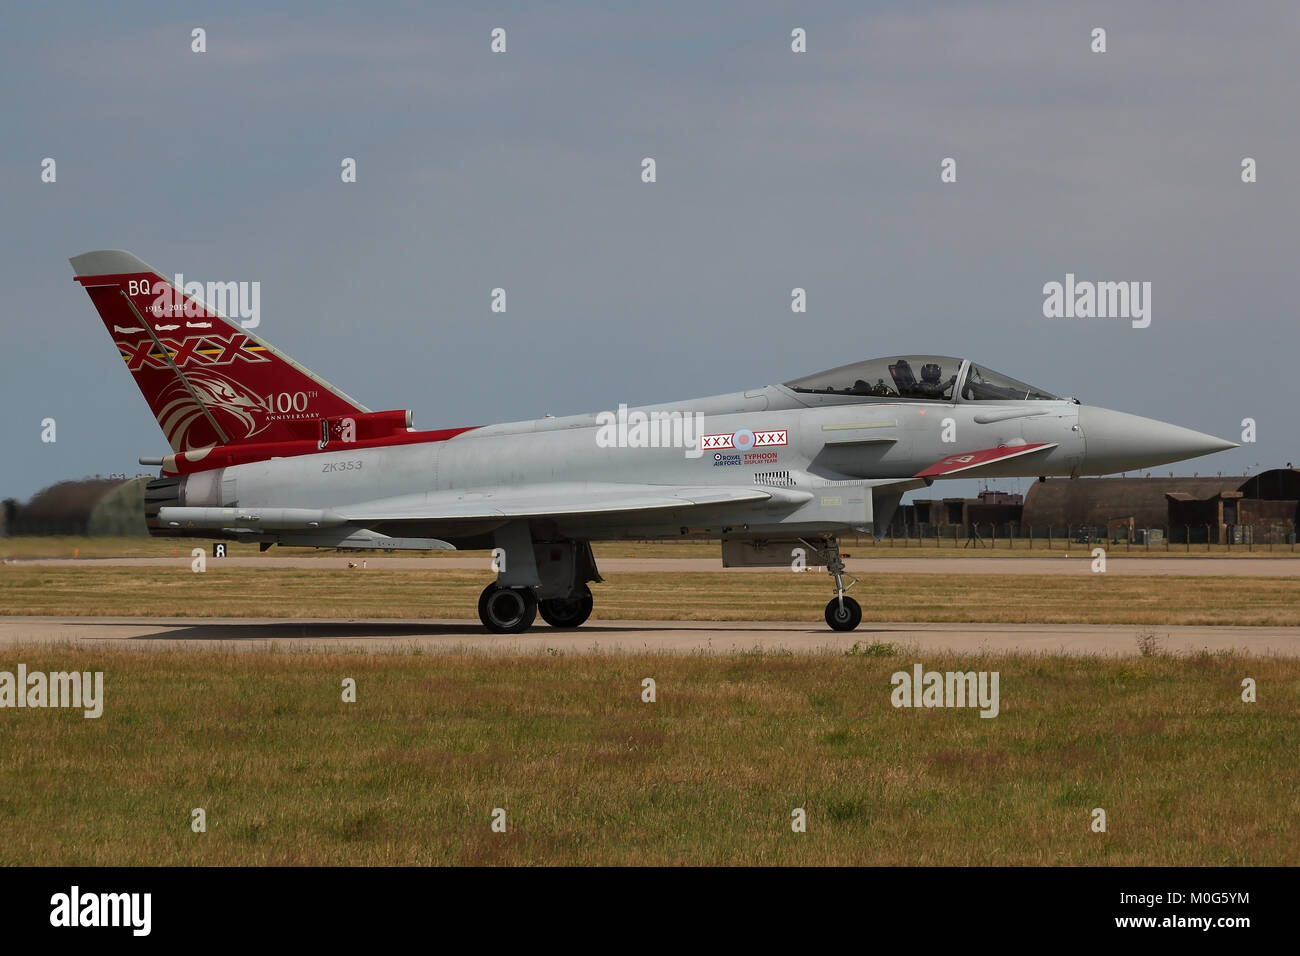 Showing the Squadron markings on a red tail, this Eurofighter Typhoon is marked to commemorate the 100th anniversary of 29 Squadron, Royal Air Force. Stock Photo